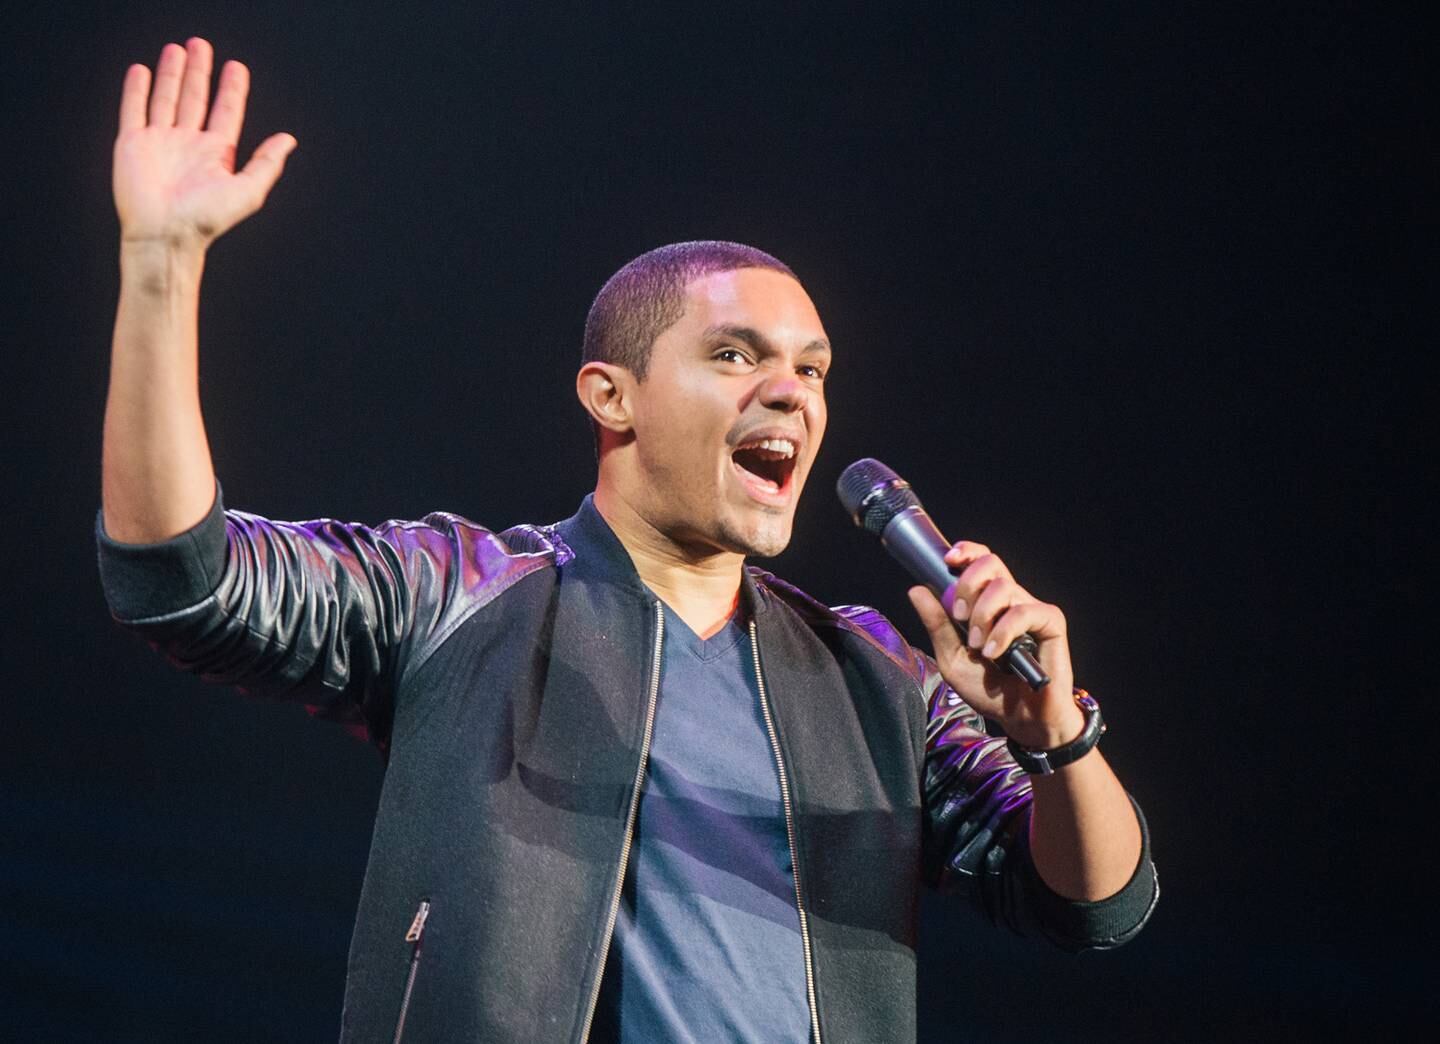 Dubai, UAE. October 24th 2015. South African comedian and presenter of The Daily Show Trevor Noah headlines the final night of the 2015 Dubai Comedy Fest at Skydive Dubai. Alex Atack for The National. 